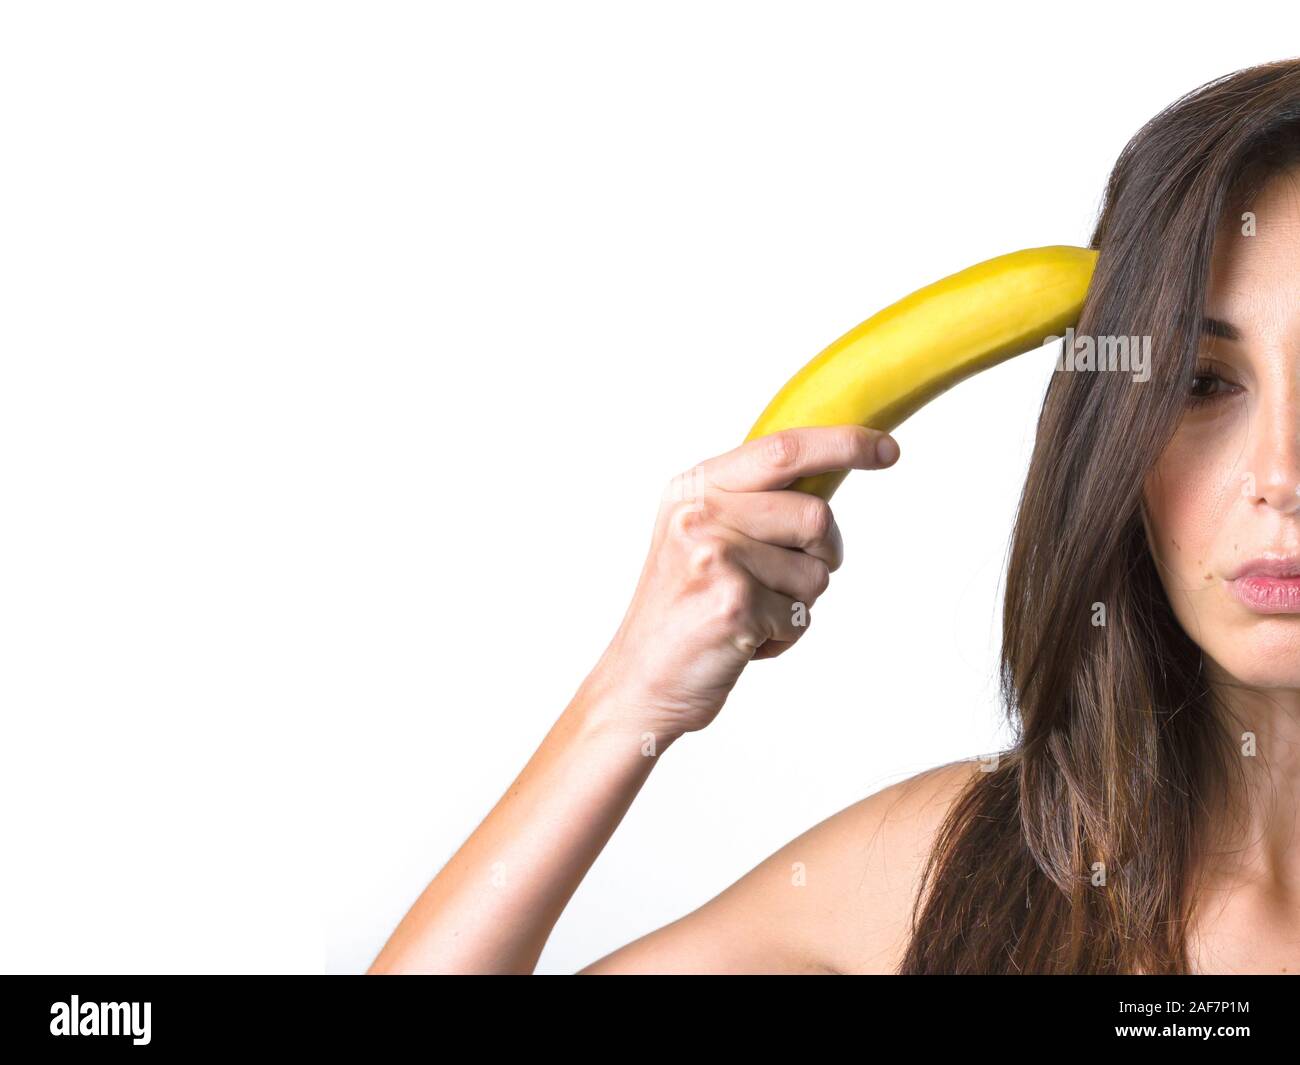 Woman holds a banana near her head in the manner of a revolver. Space for text. Stock Photo